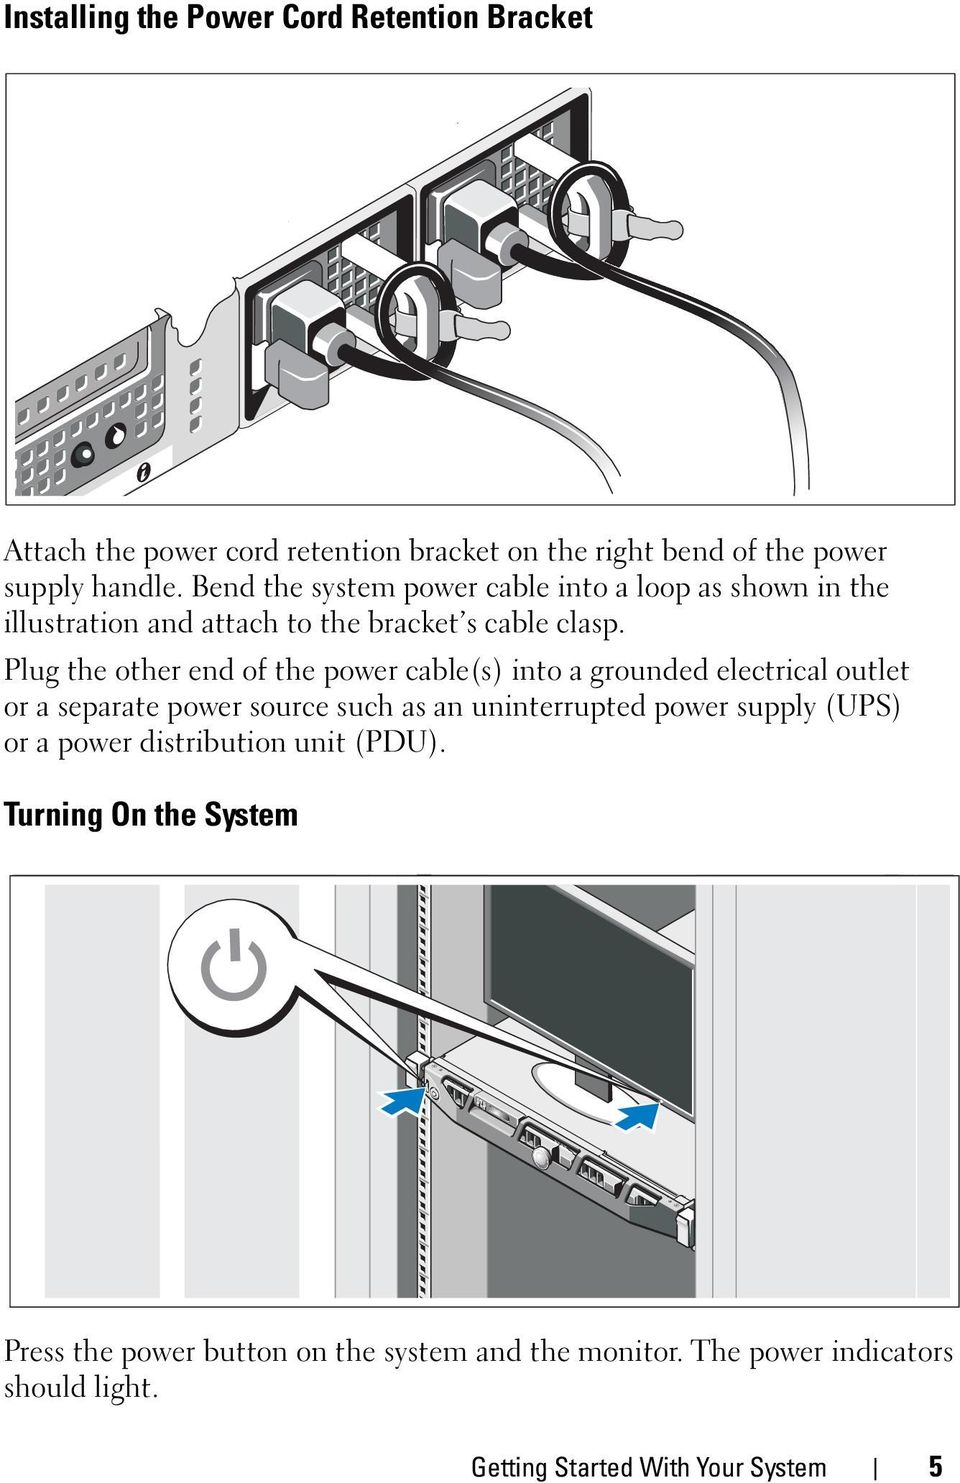 Plug the other end of the power cable(s) into a grounded electrical outlet or a separate power source such as an uninterrupted power supply